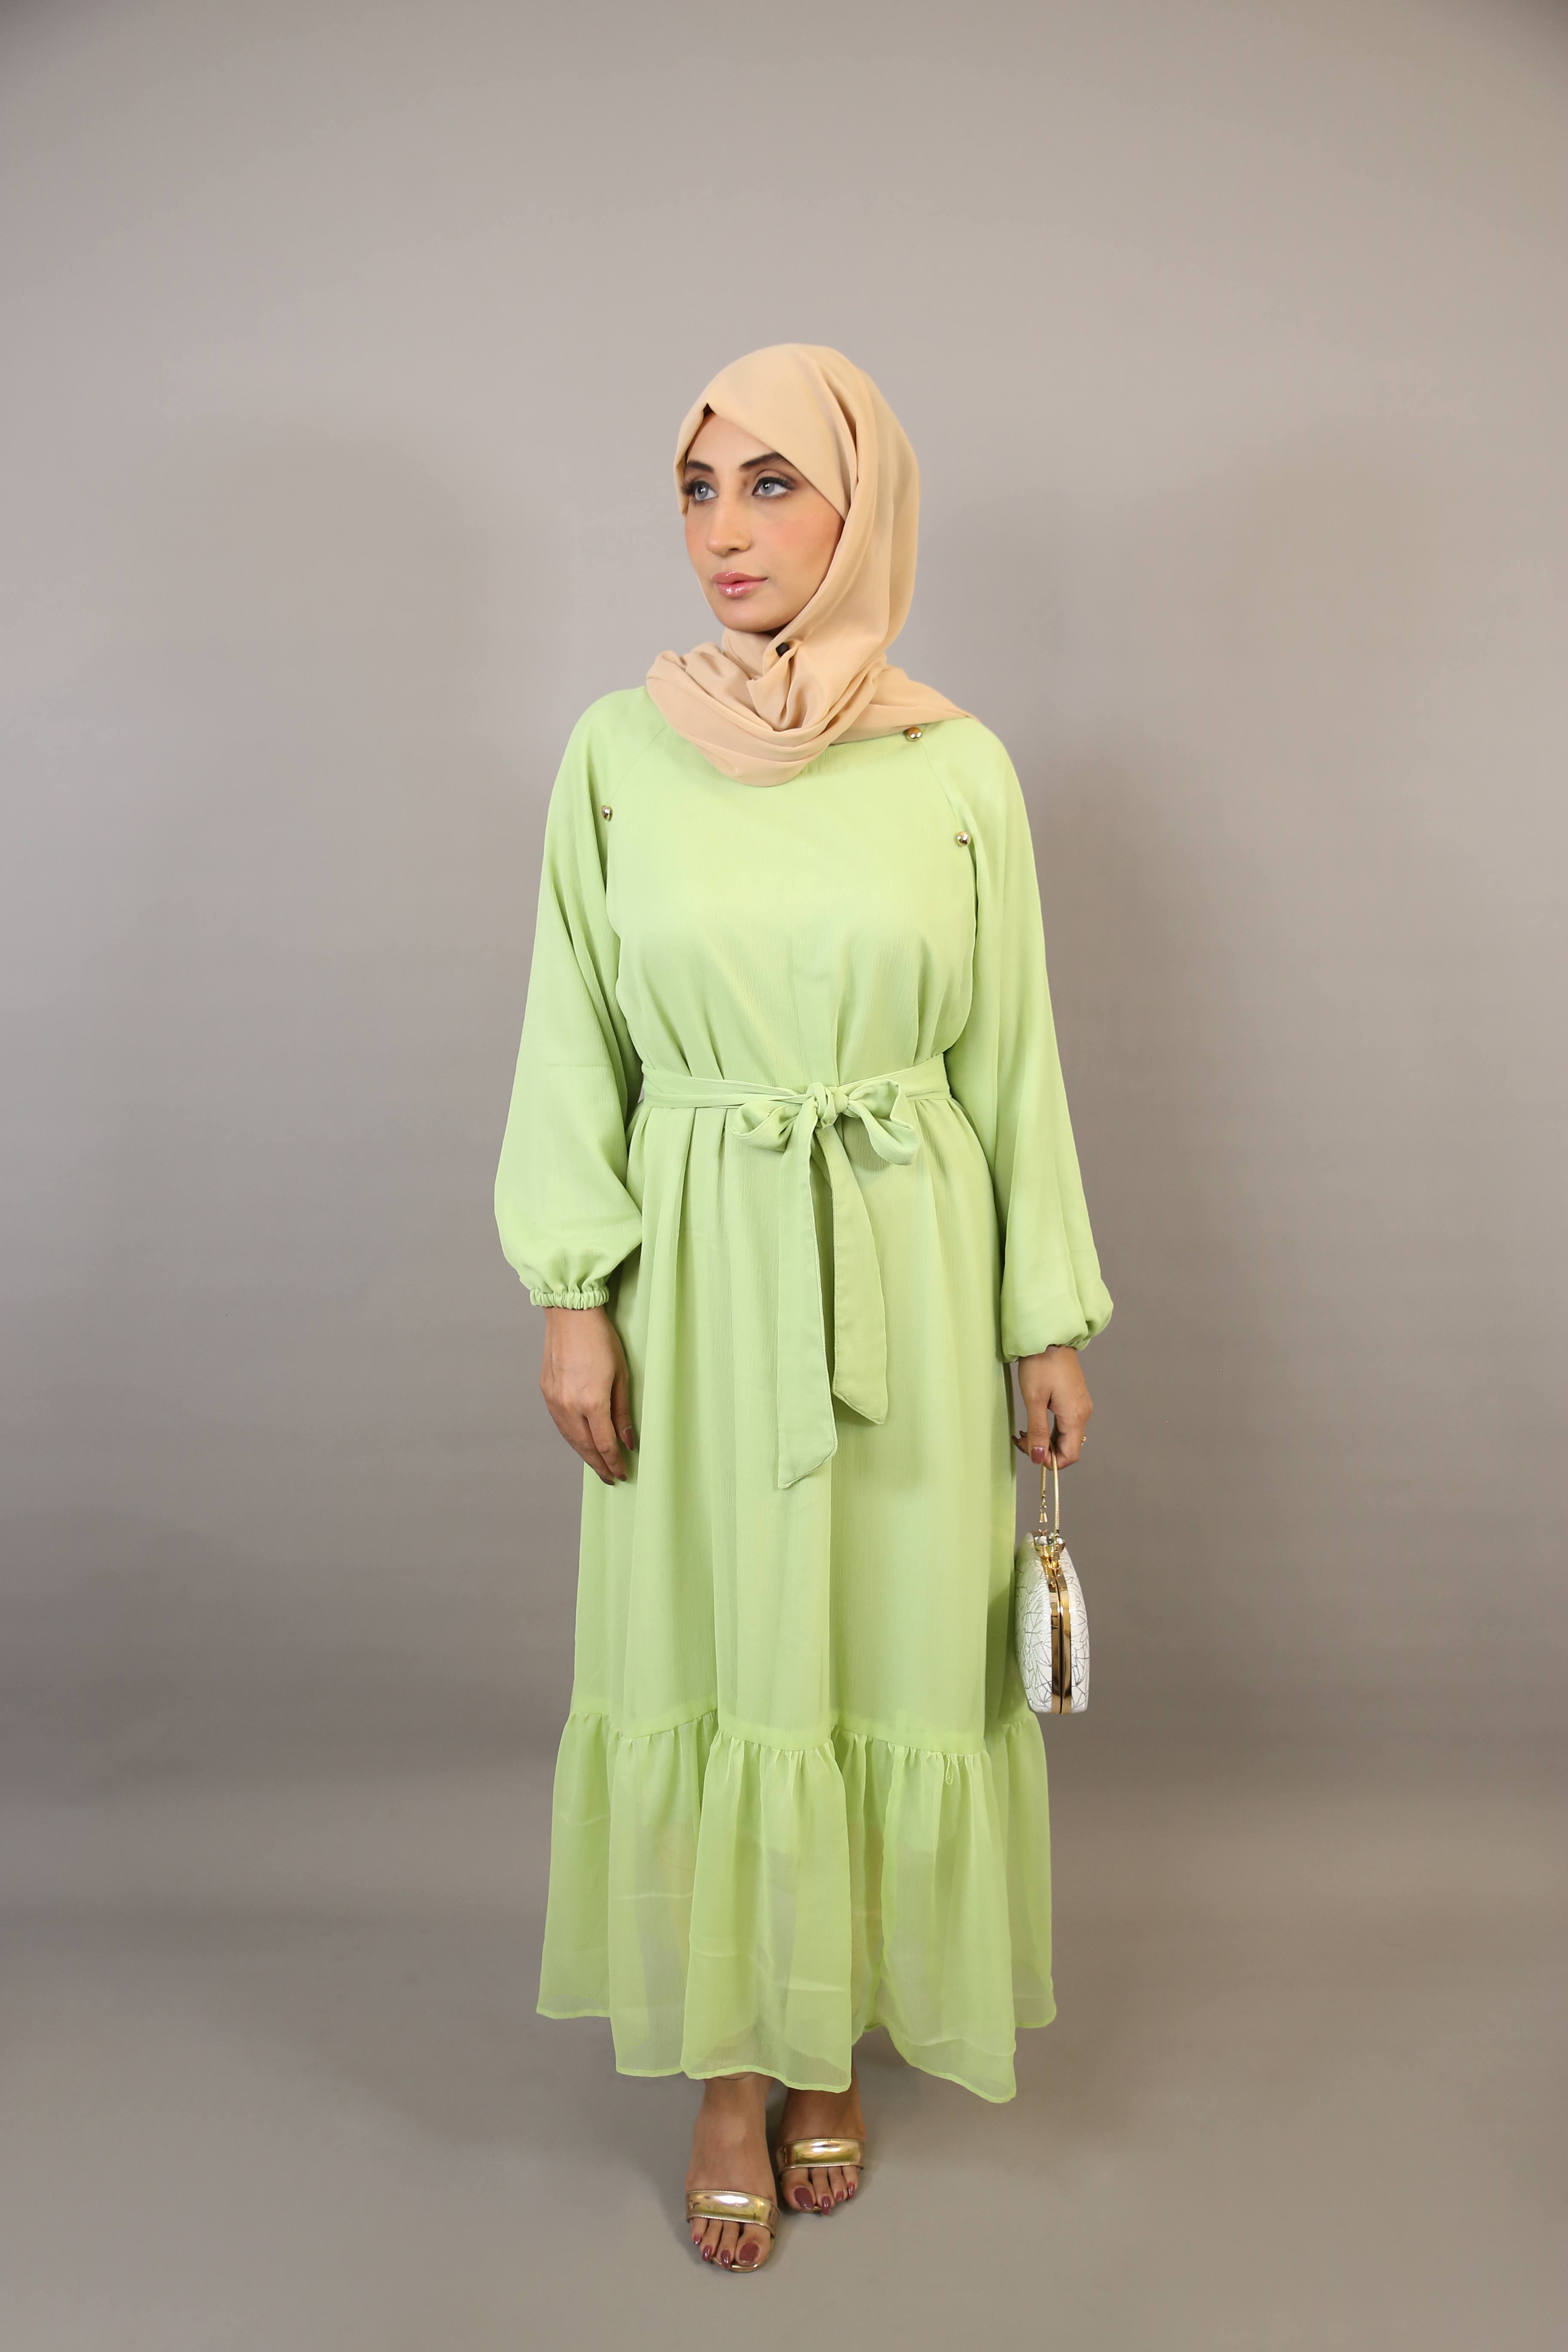 Shabi- Vibrant Chiffon lined maxi dress with button detailing and matching belt- Electric Green